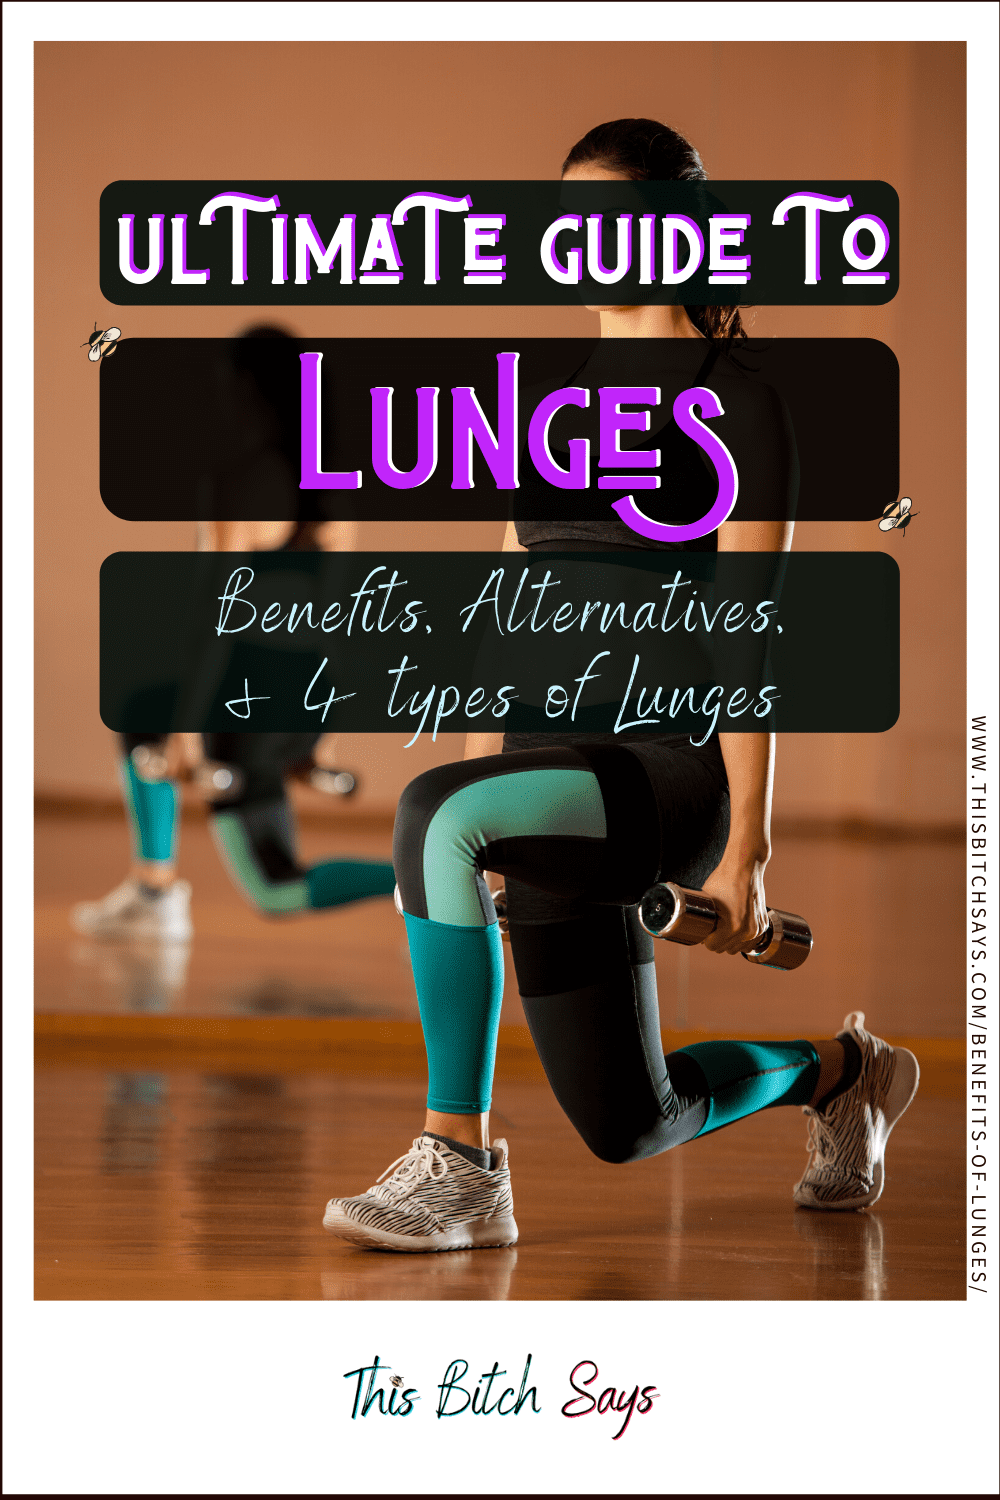 For Your Fitness: ultimate guide to lunges. (benefits, alternatives, and 4 types of lunges)